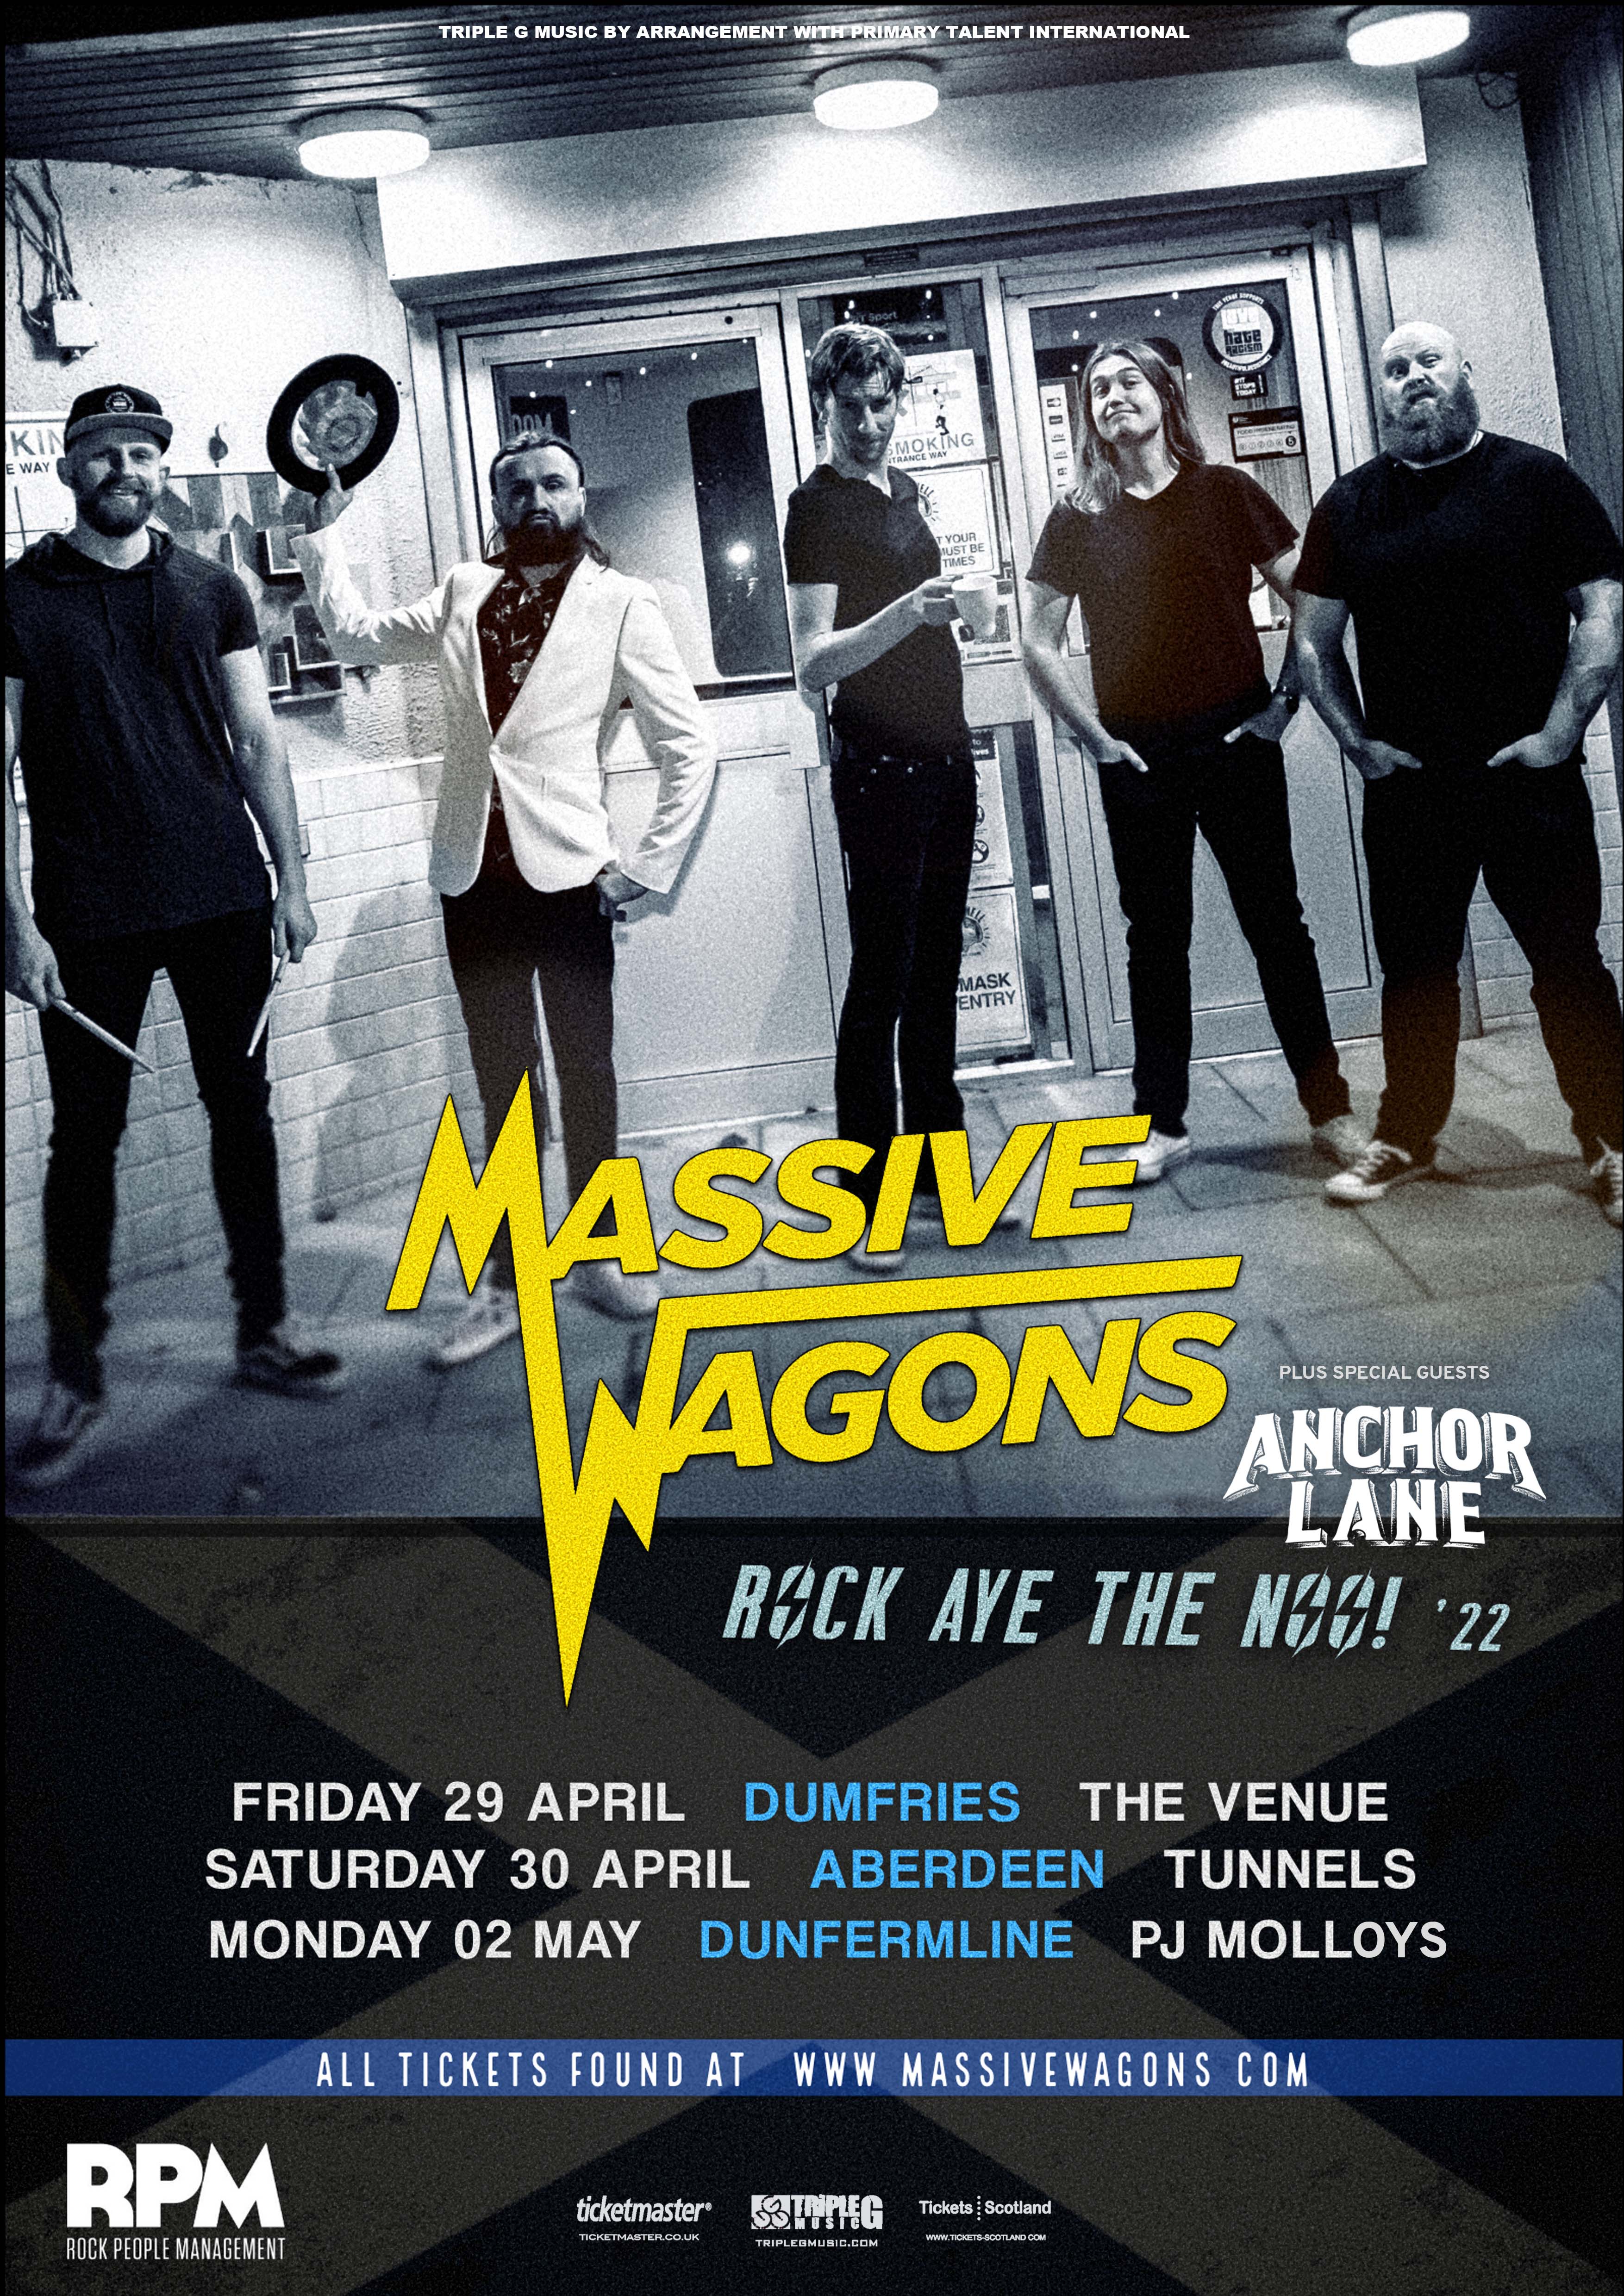 ANCHOR LANE ANNOUNCED AS SPECIAL GUESTS TO MASSIVE WAGONS